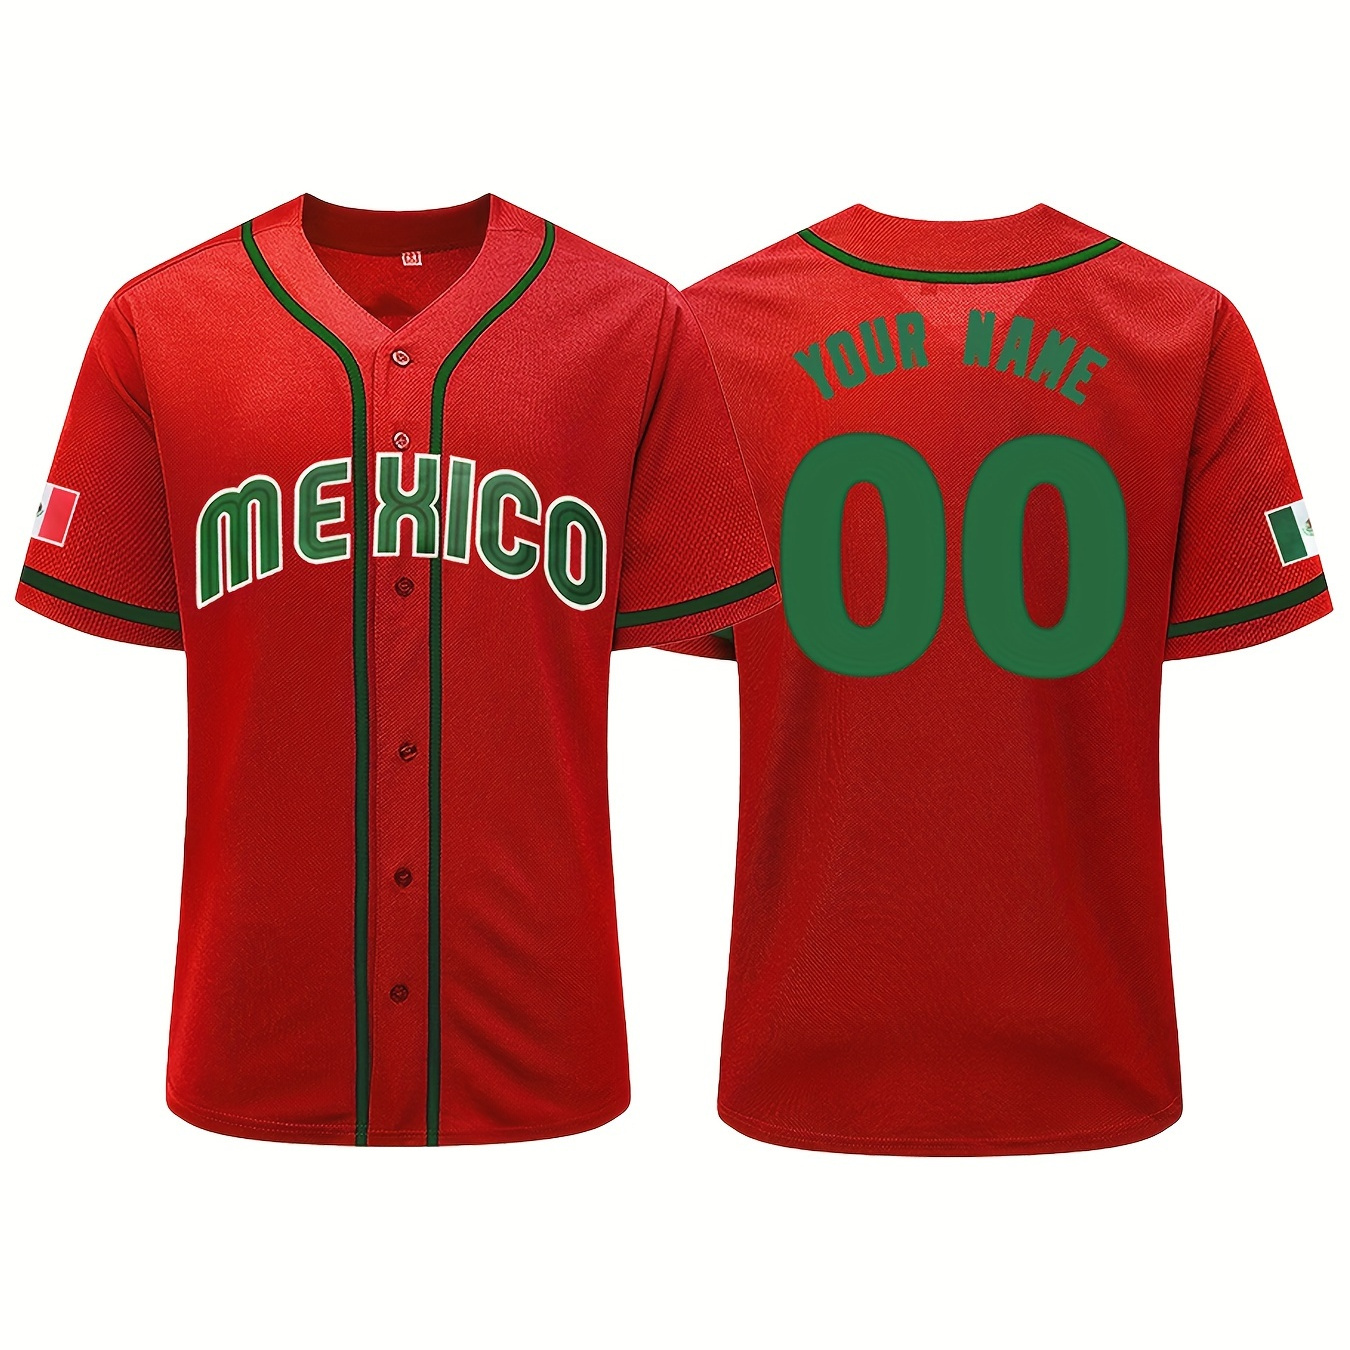 

Men's "mexico" Pattern, Customized Name And Number Print Short Sleeve And Button Down Baseball Jersey, Casual And Chic Tops For Summer Outdoors And Sports Wear